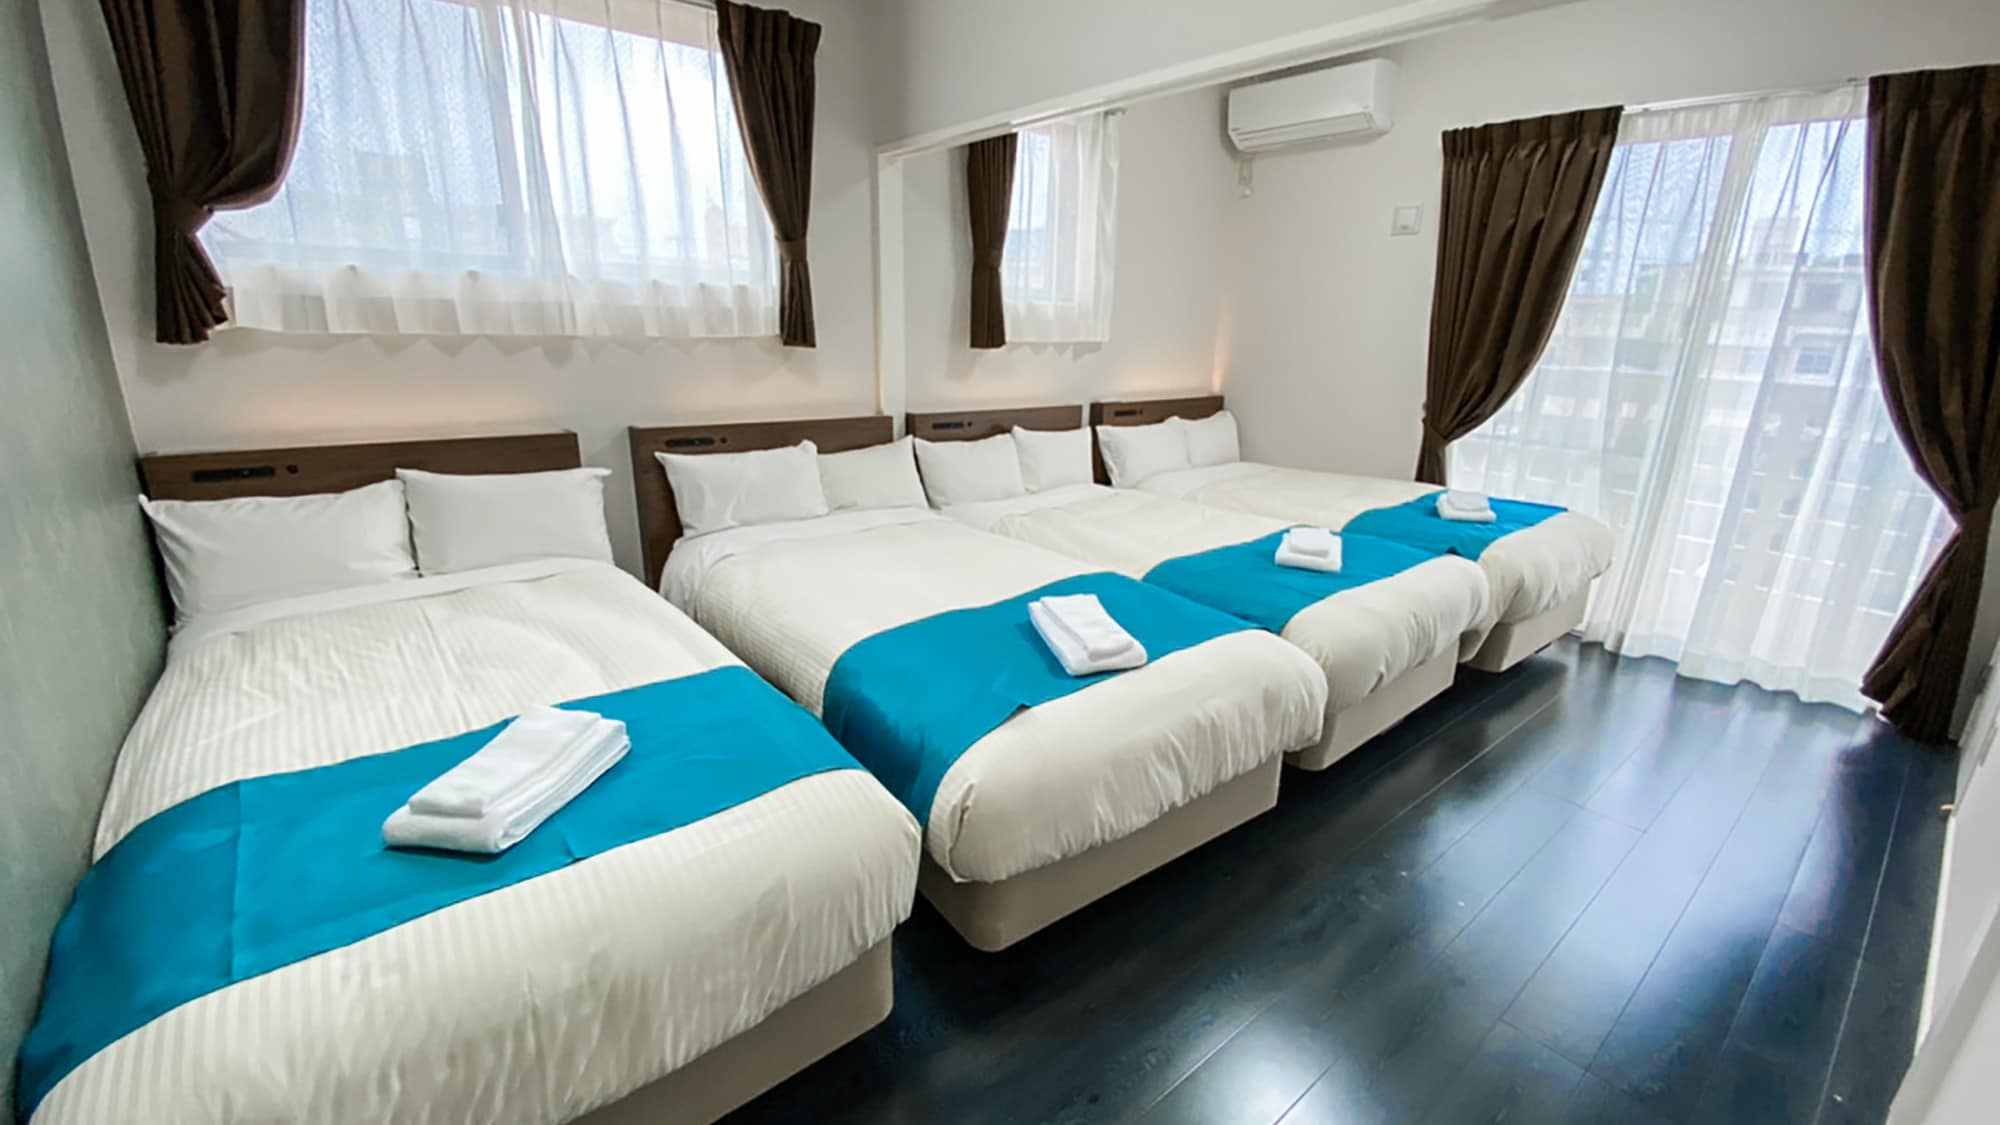 [Deluxe Family Twin] There are 4 single beds and 1 double bed, so it can be used by a large number of people.